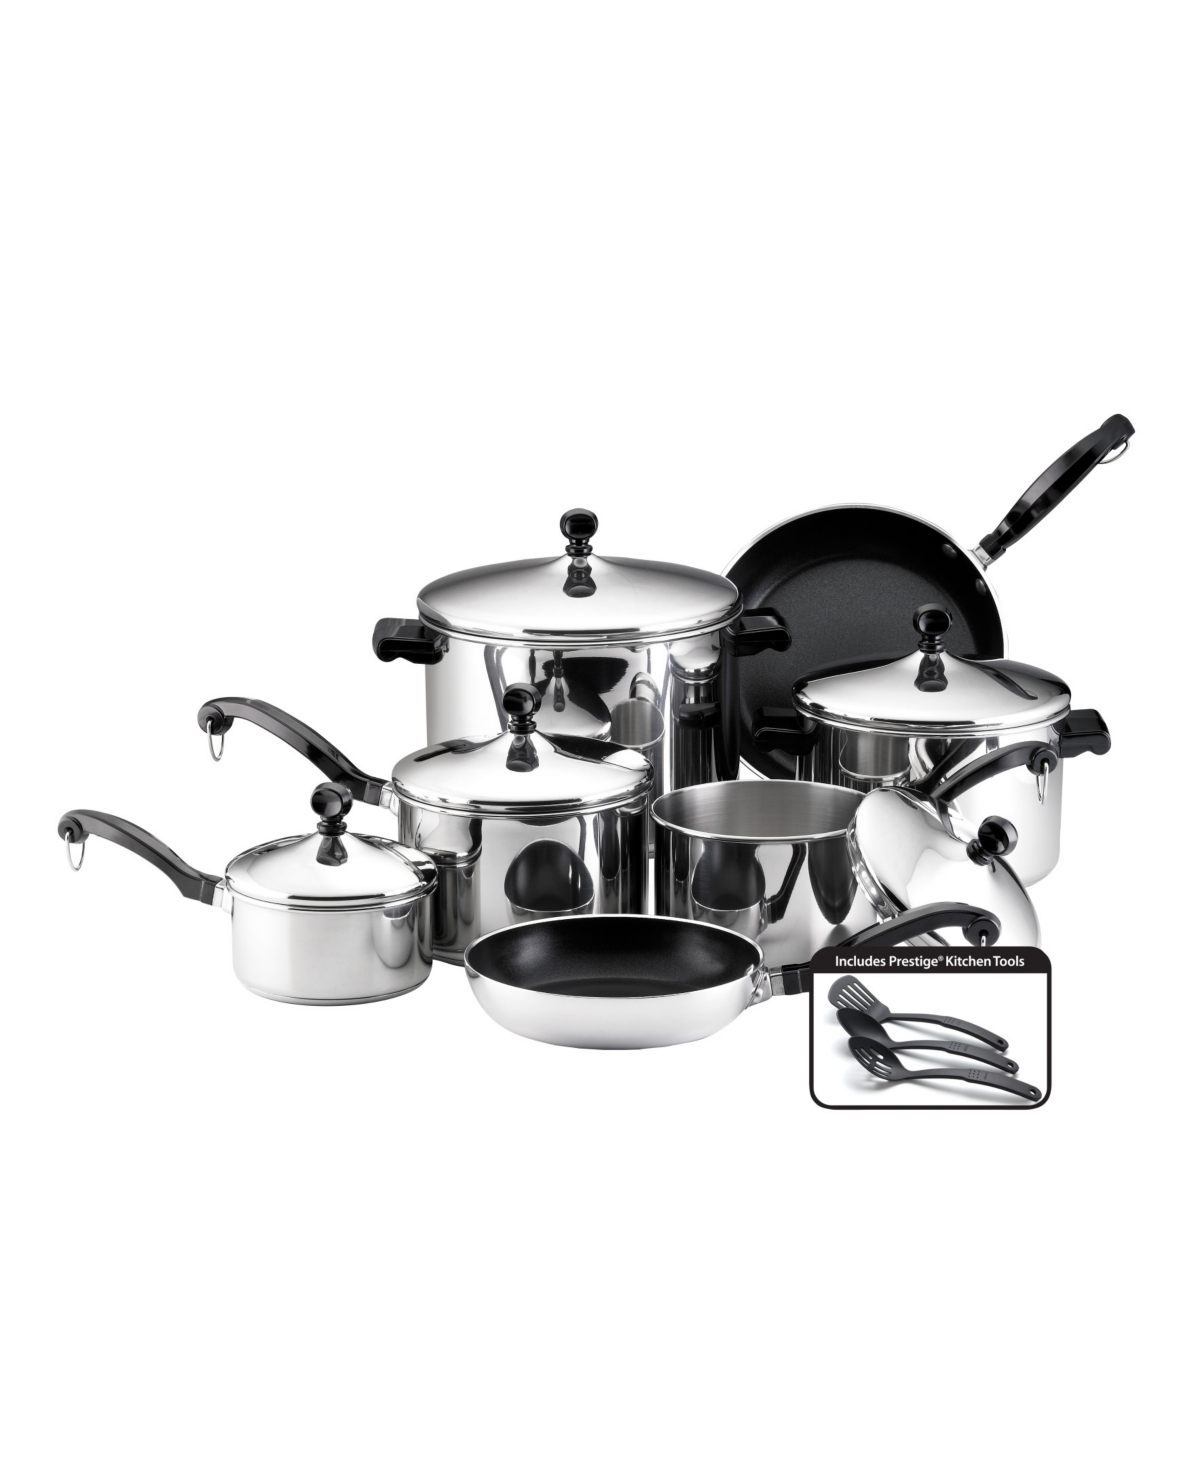 Farberware Classic Stainless Steel 15-Pc. Cookware Set